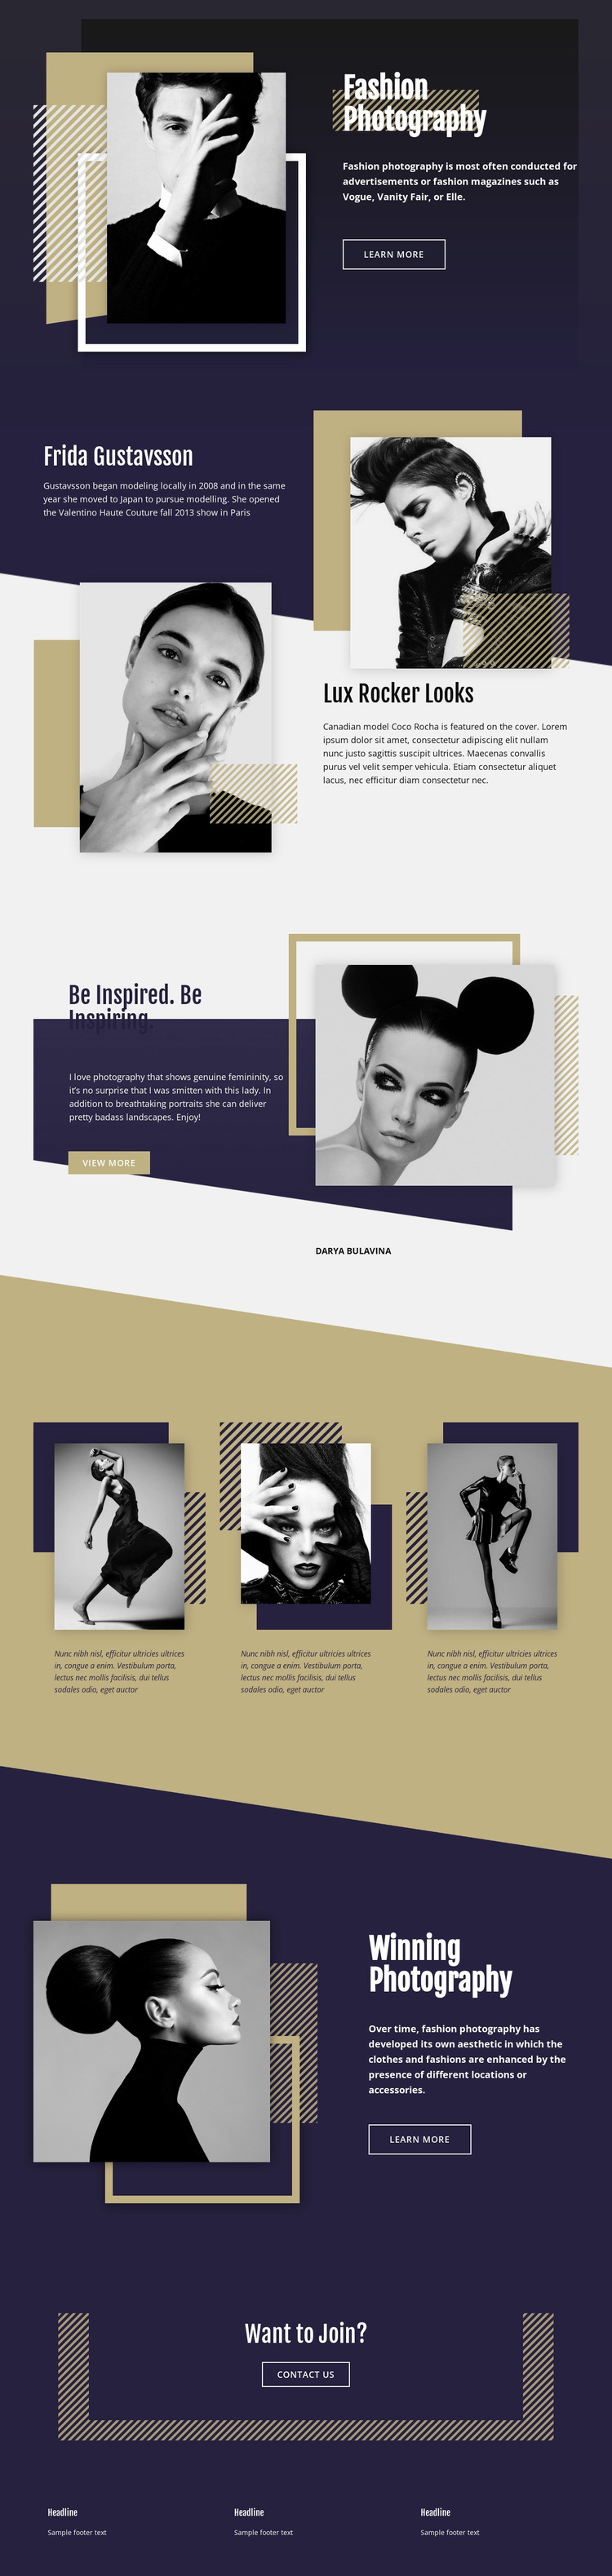 Fashion Photography Website Builder Templates